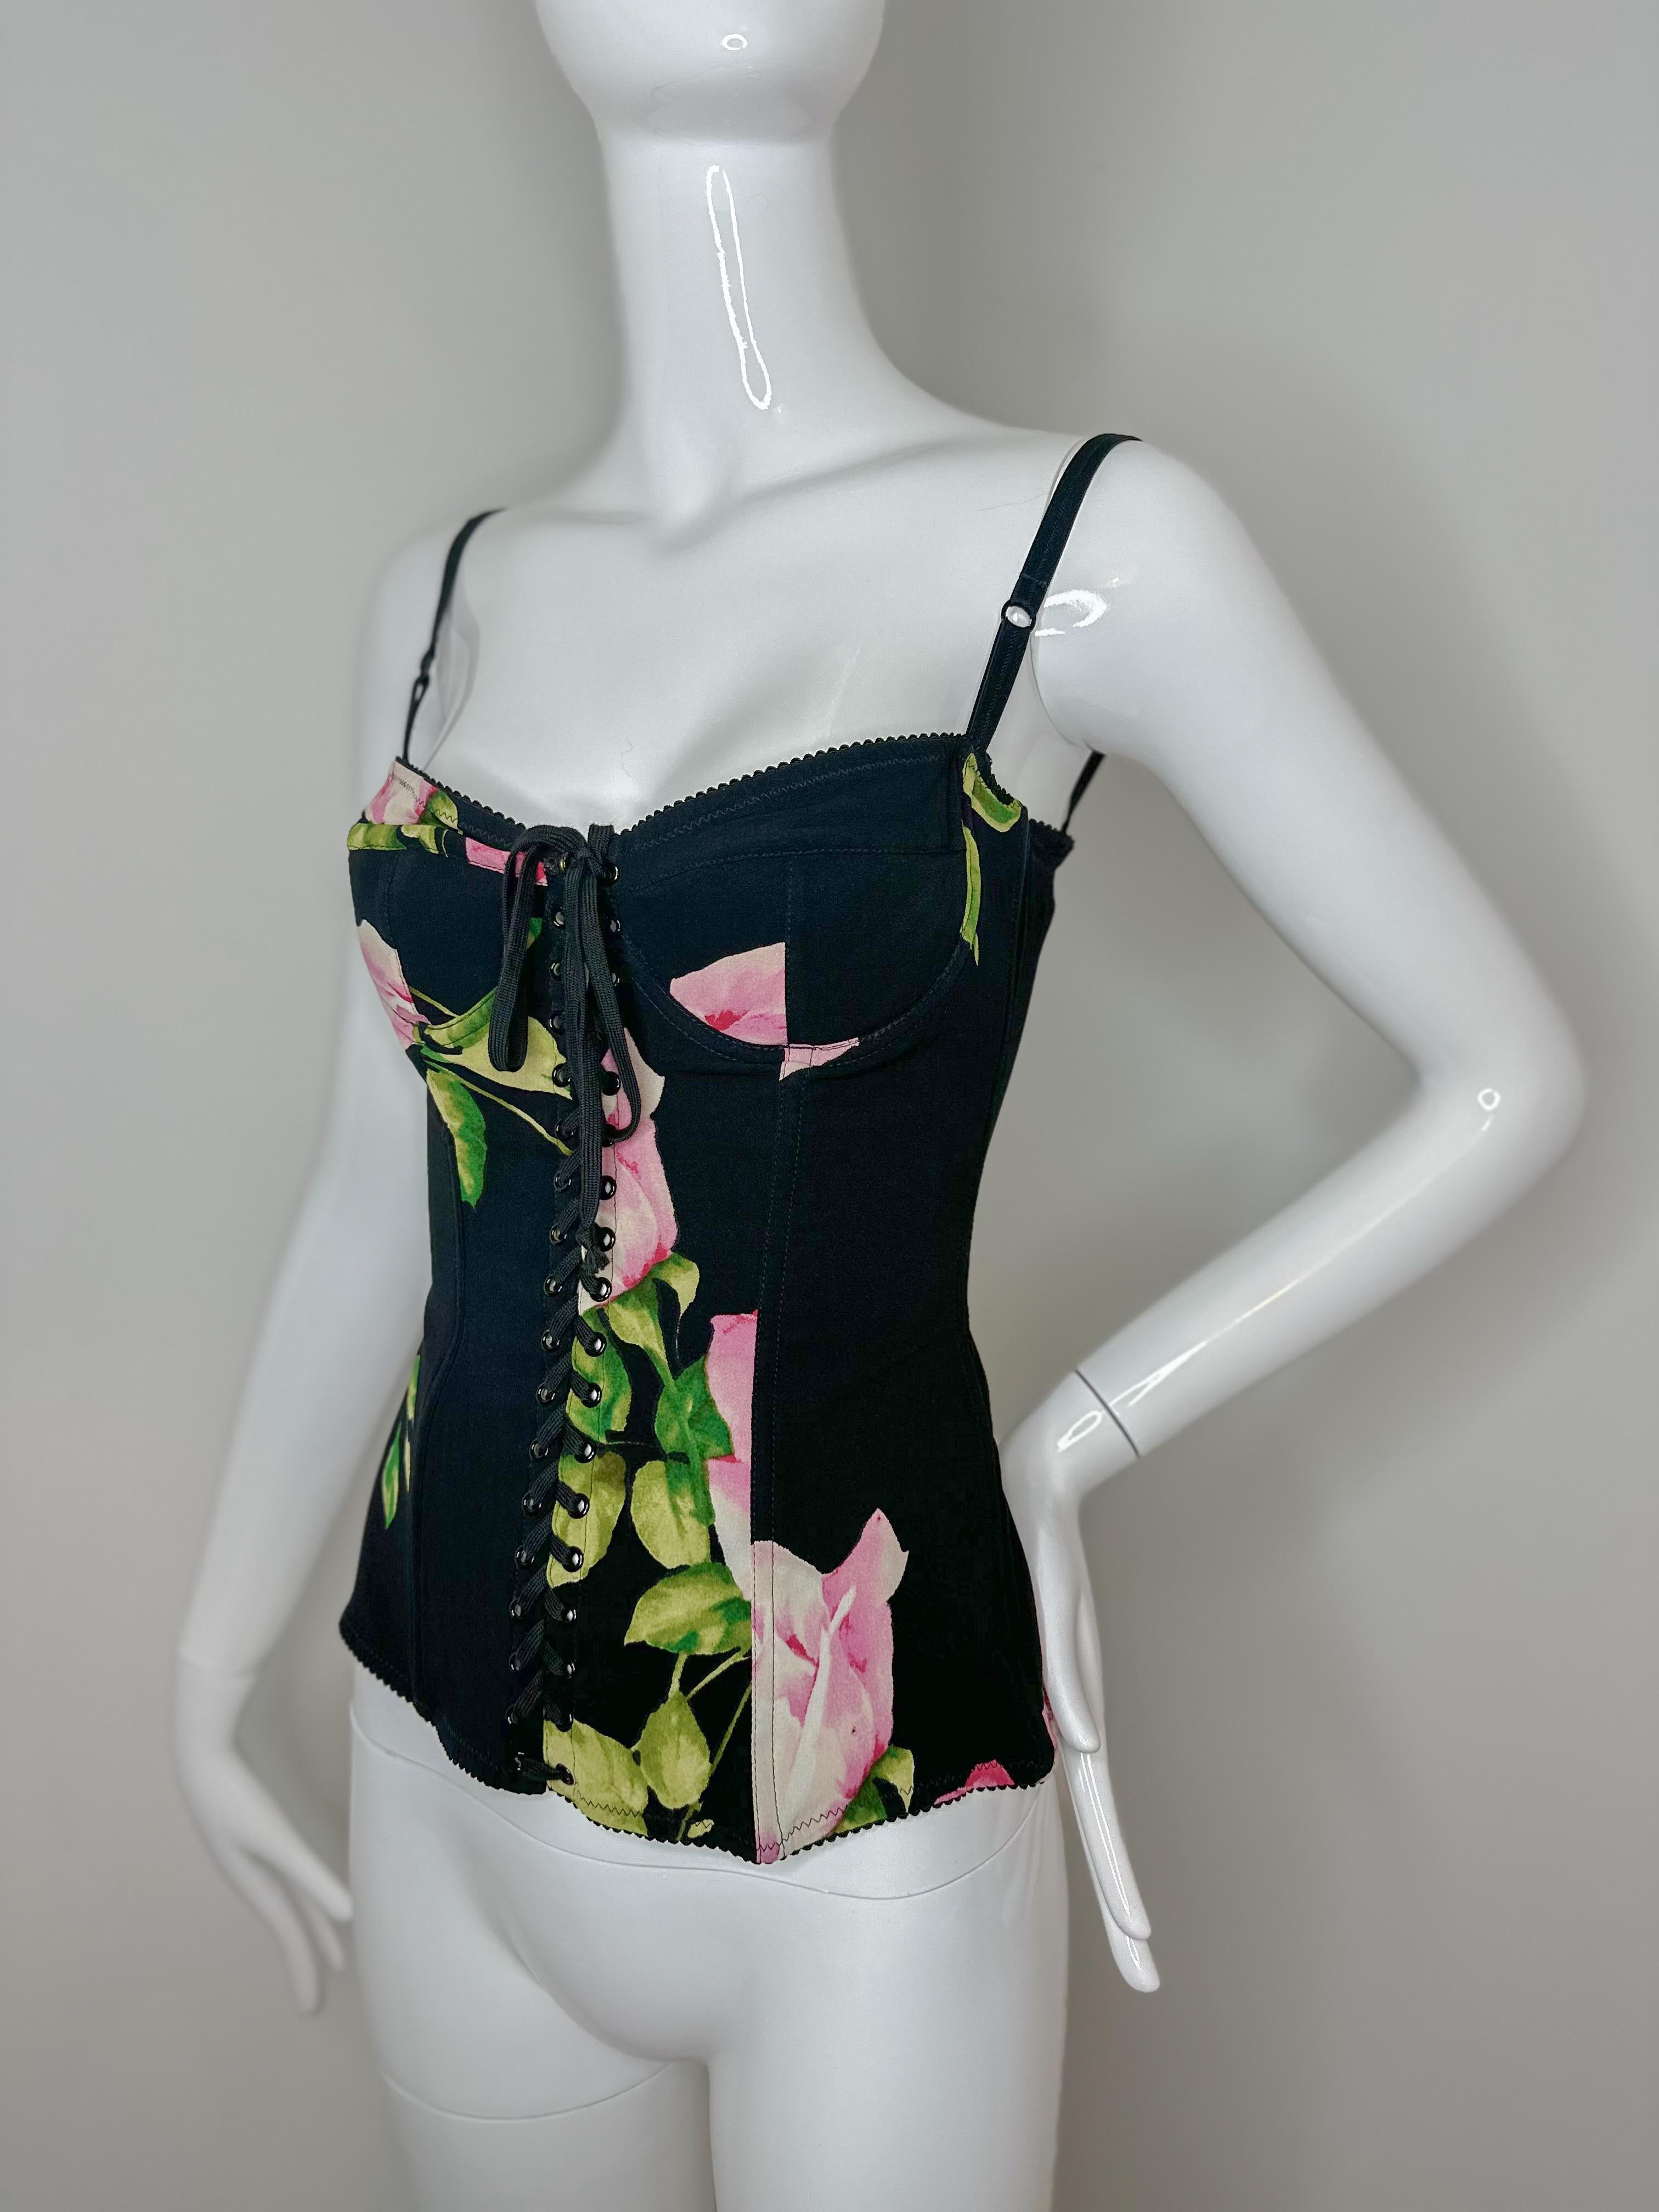 Dolce Gabbana 2000’s silk floral corset top 

Hook closure in the back, adjustable straps 

Silk 

Size 42

Good vintage condition, no rips or stains

